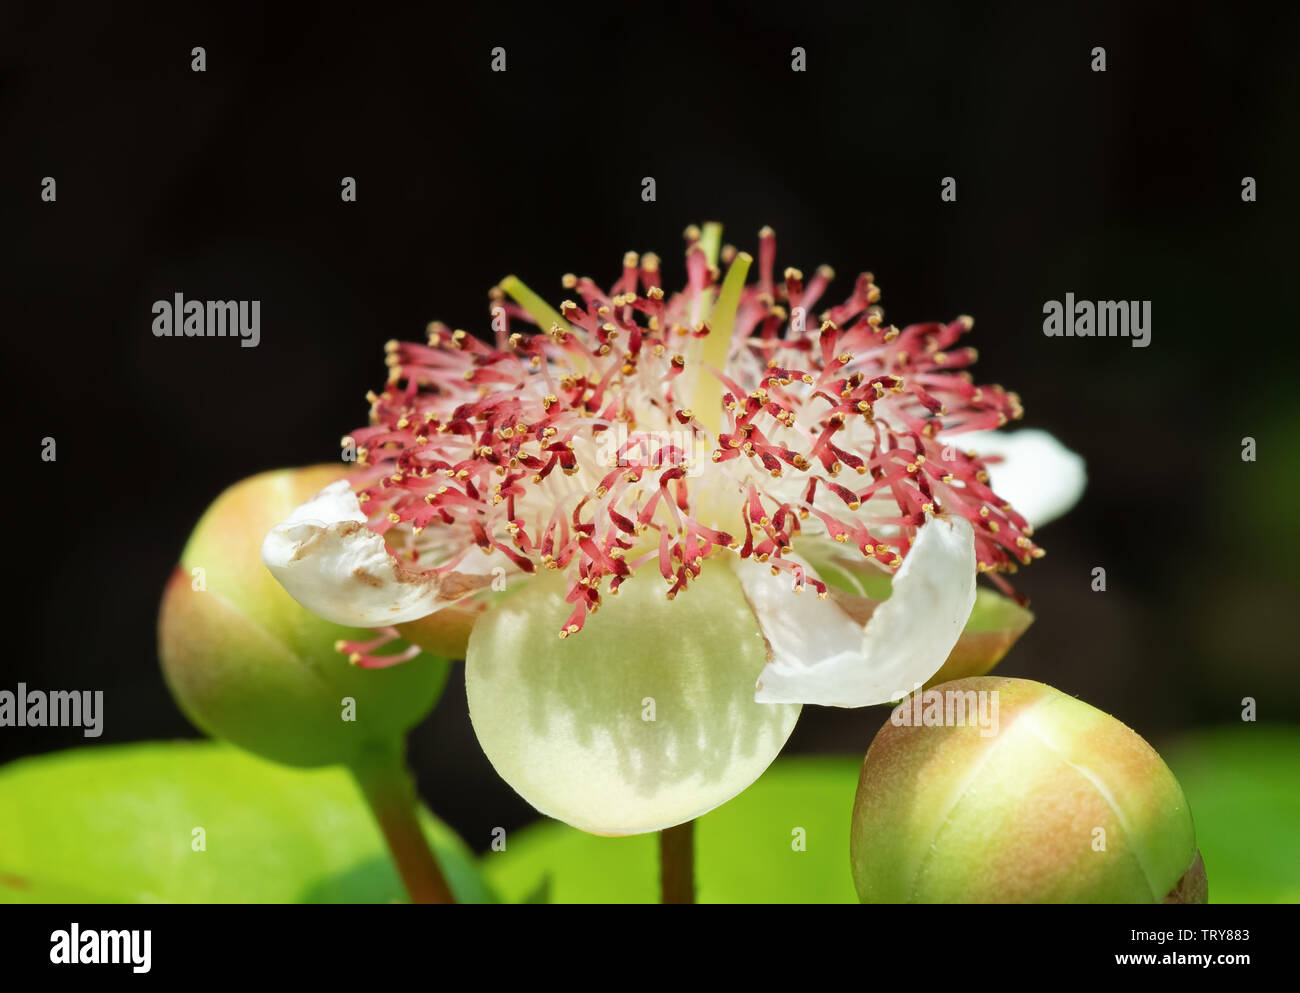 Closeup Tetracera indica Flower with Buds Isolated on Black Background, Selective Focus Stock Photo